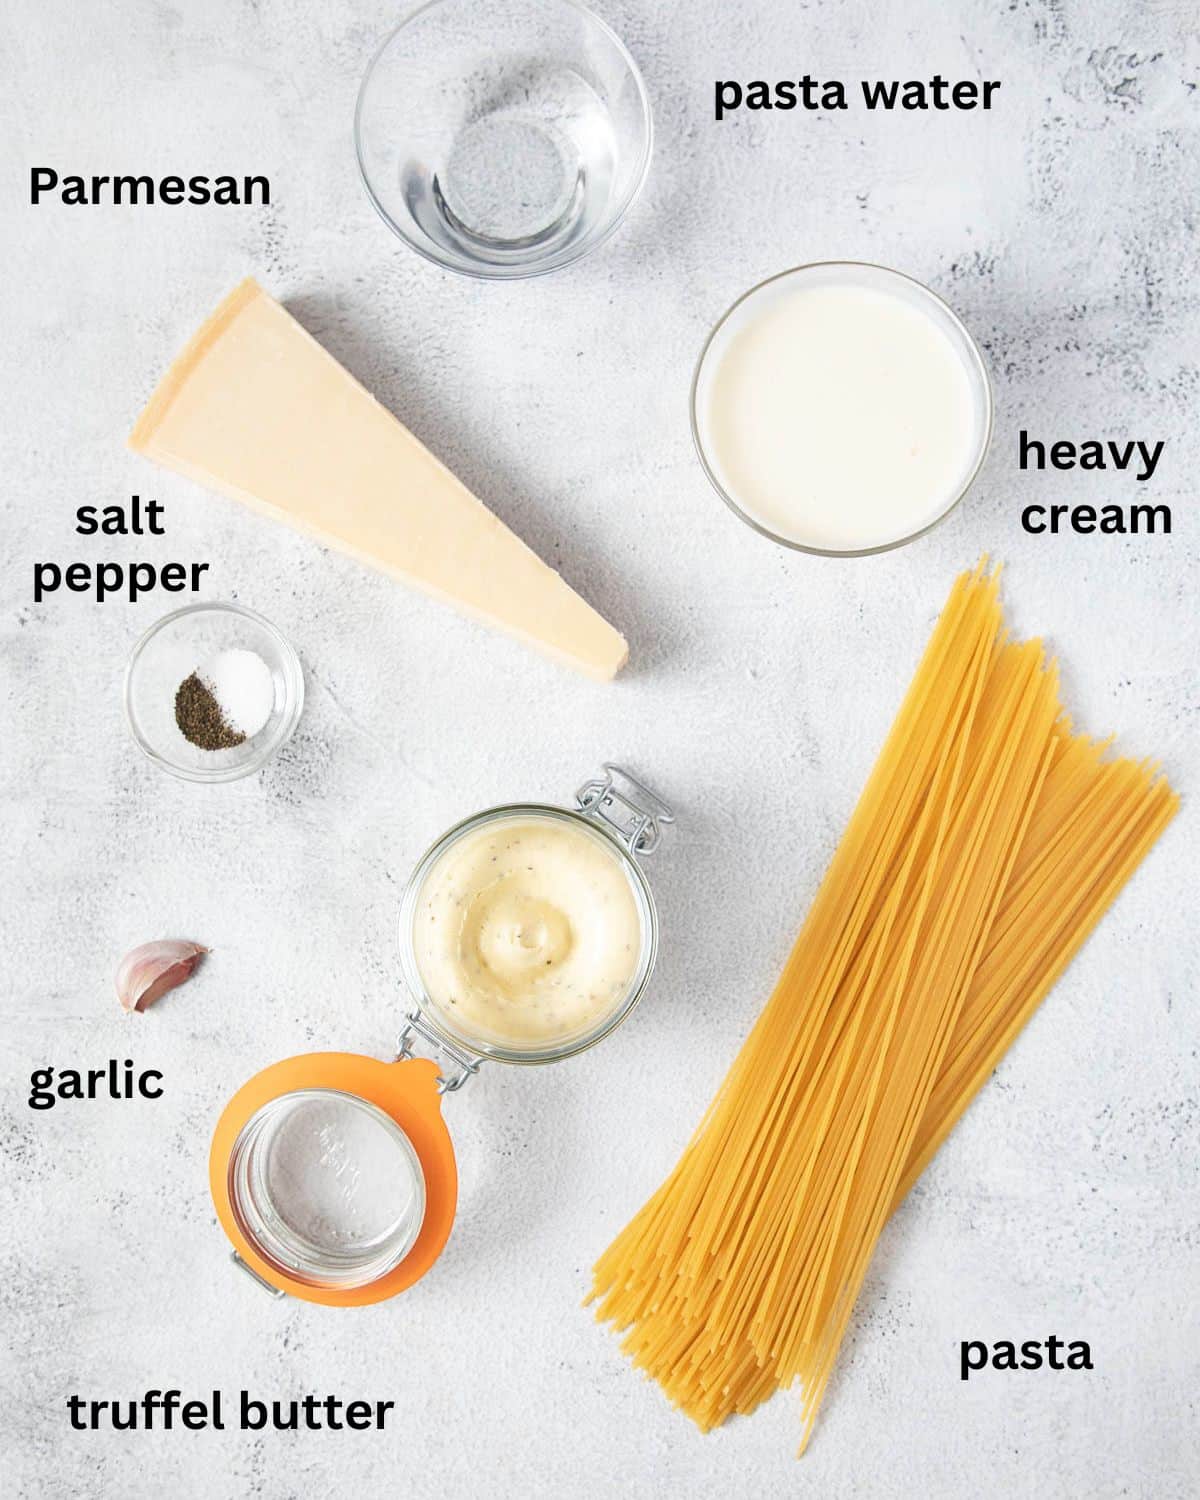 listed ingredients for making spaghetti with truffle butter, cream and Parmesan.